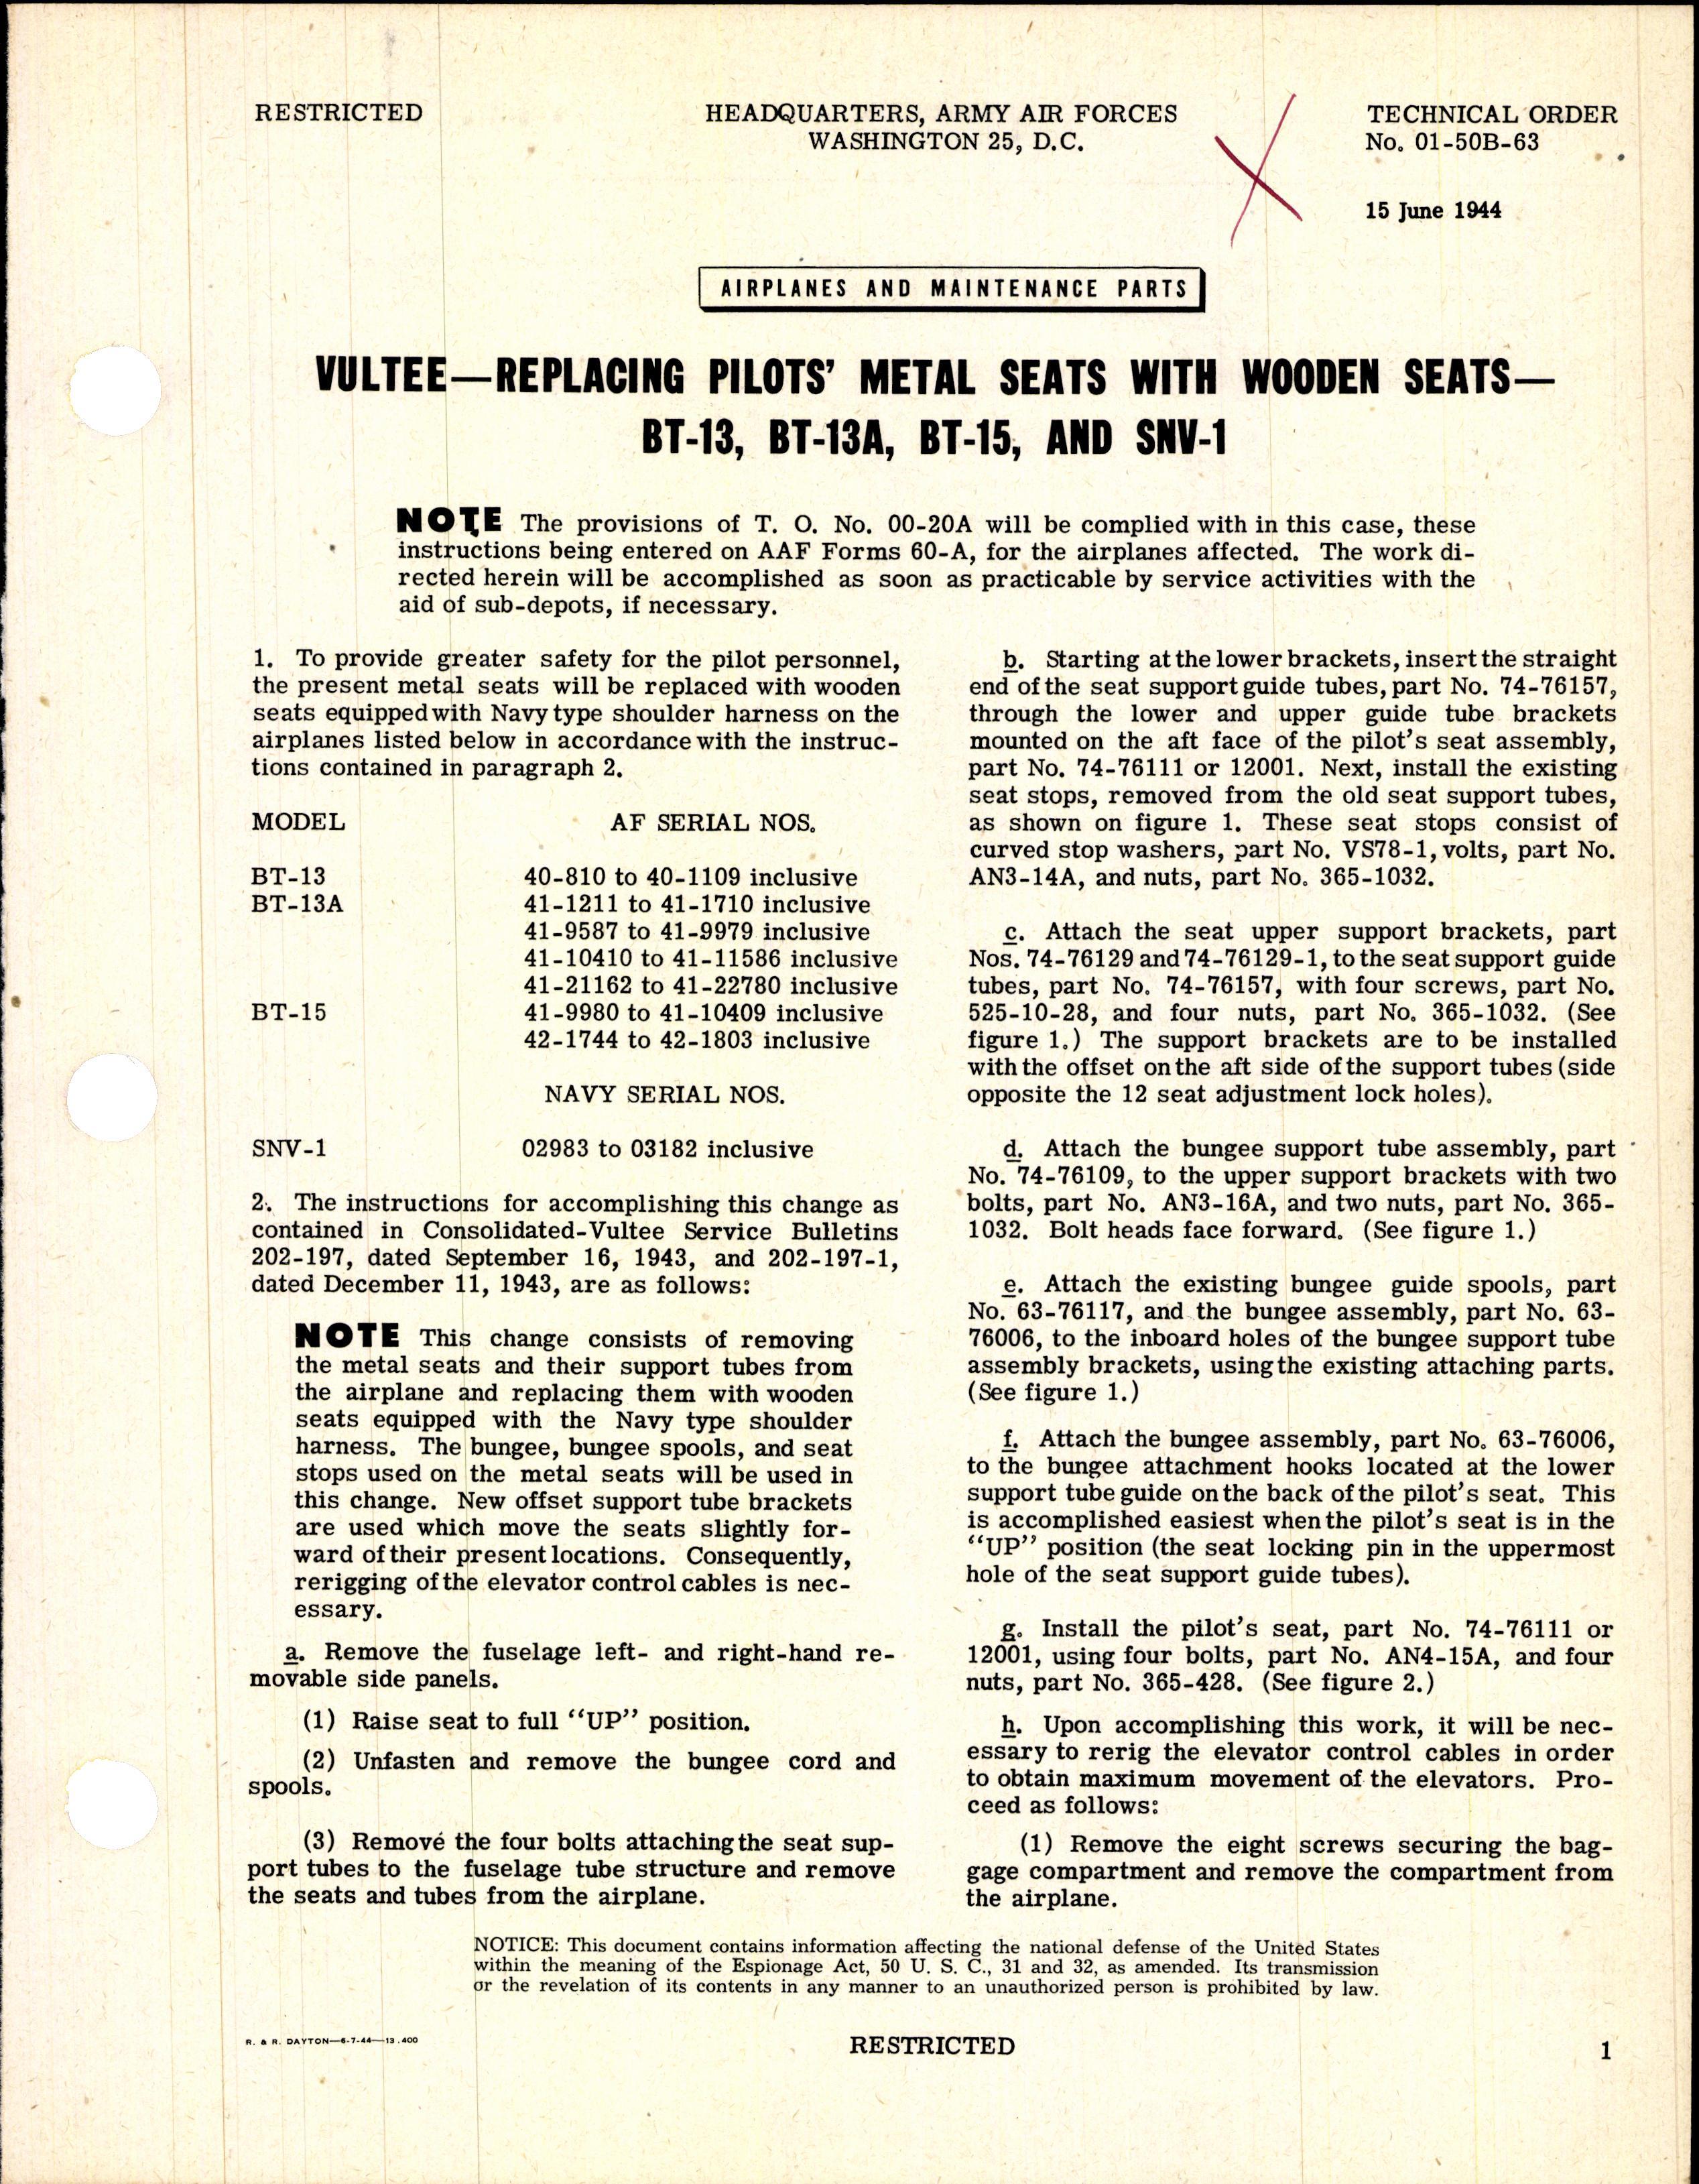 Sample page 1 from AirCorps Library document: Replacing Pilots' Metal Seat with Wooden Seats - BT-13, BT-13A, BT-15, and SNV-1